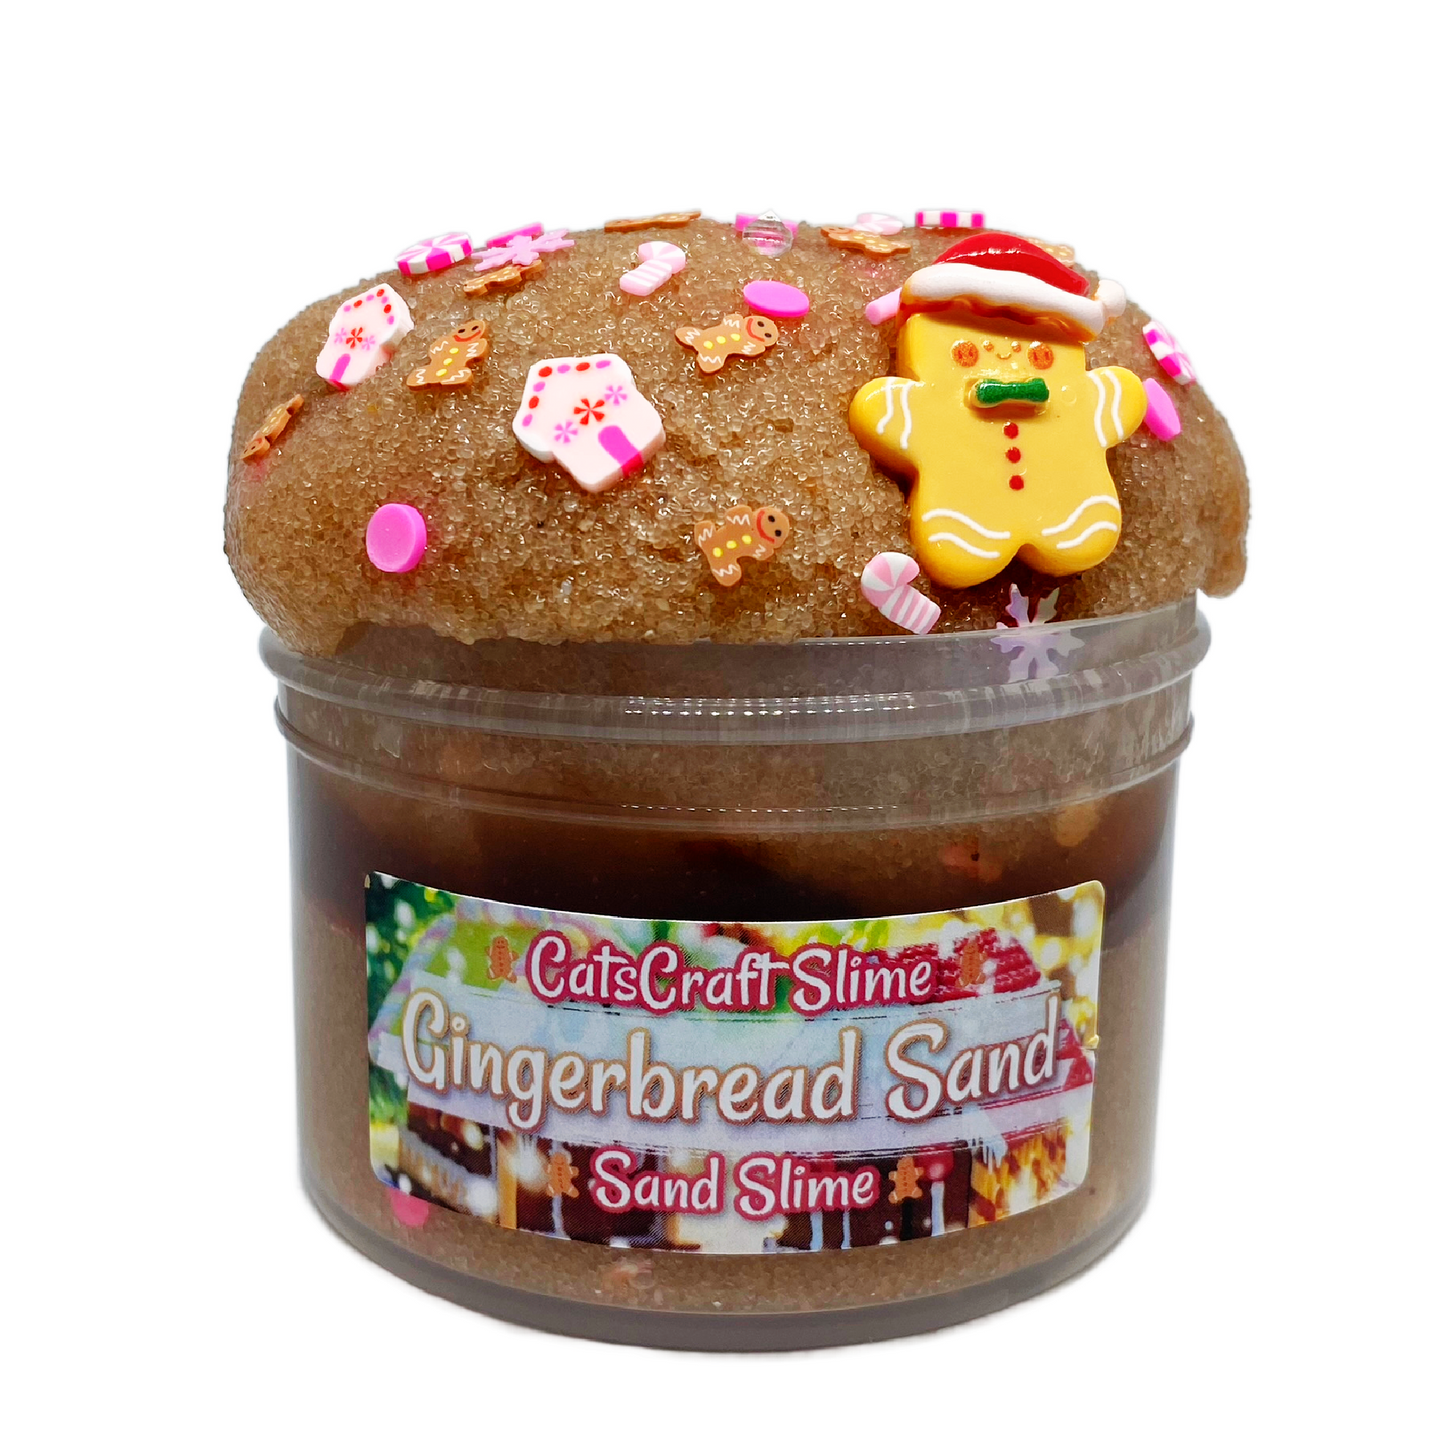 Sand Slime "Gingerbread Sand" SCENTED clear Christmas crispy ASMR With gingerbread man Charm